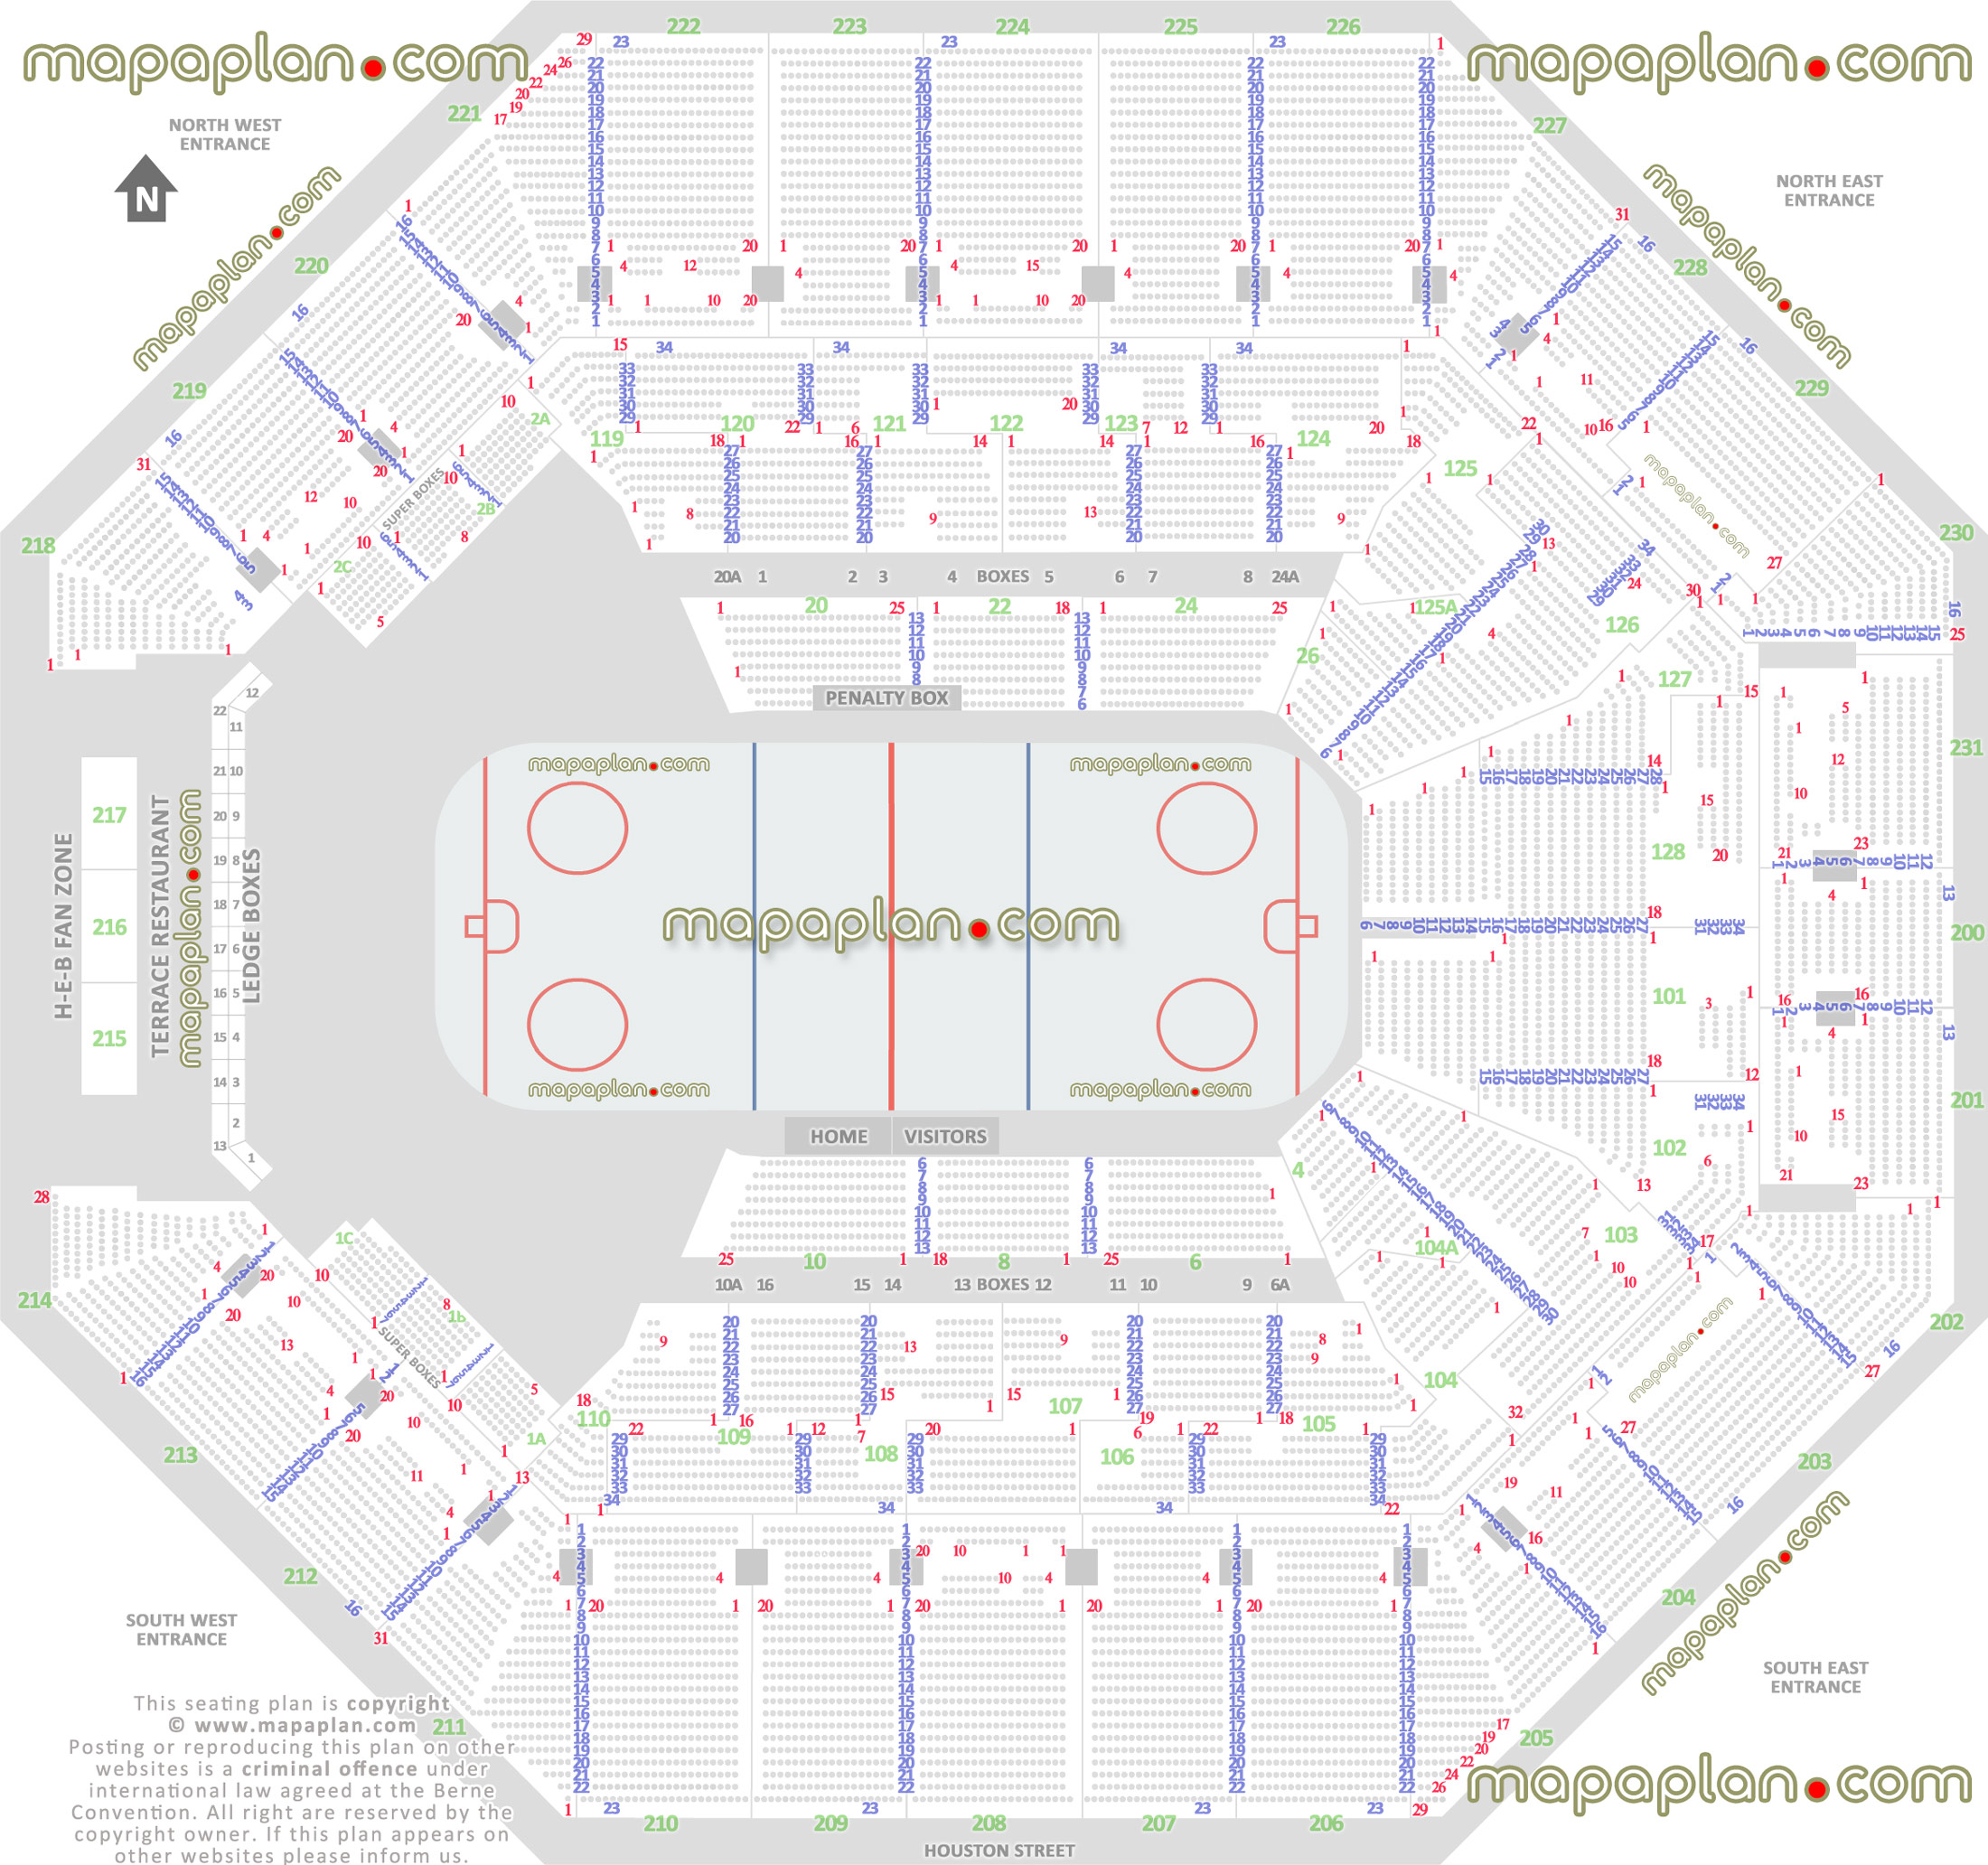 san antonio rampage ahl ice hockey seating map printable layout diagram full exact row numbers plan how seats row charter plaza terrace balcony level San Antonio AT&T Center seating chart